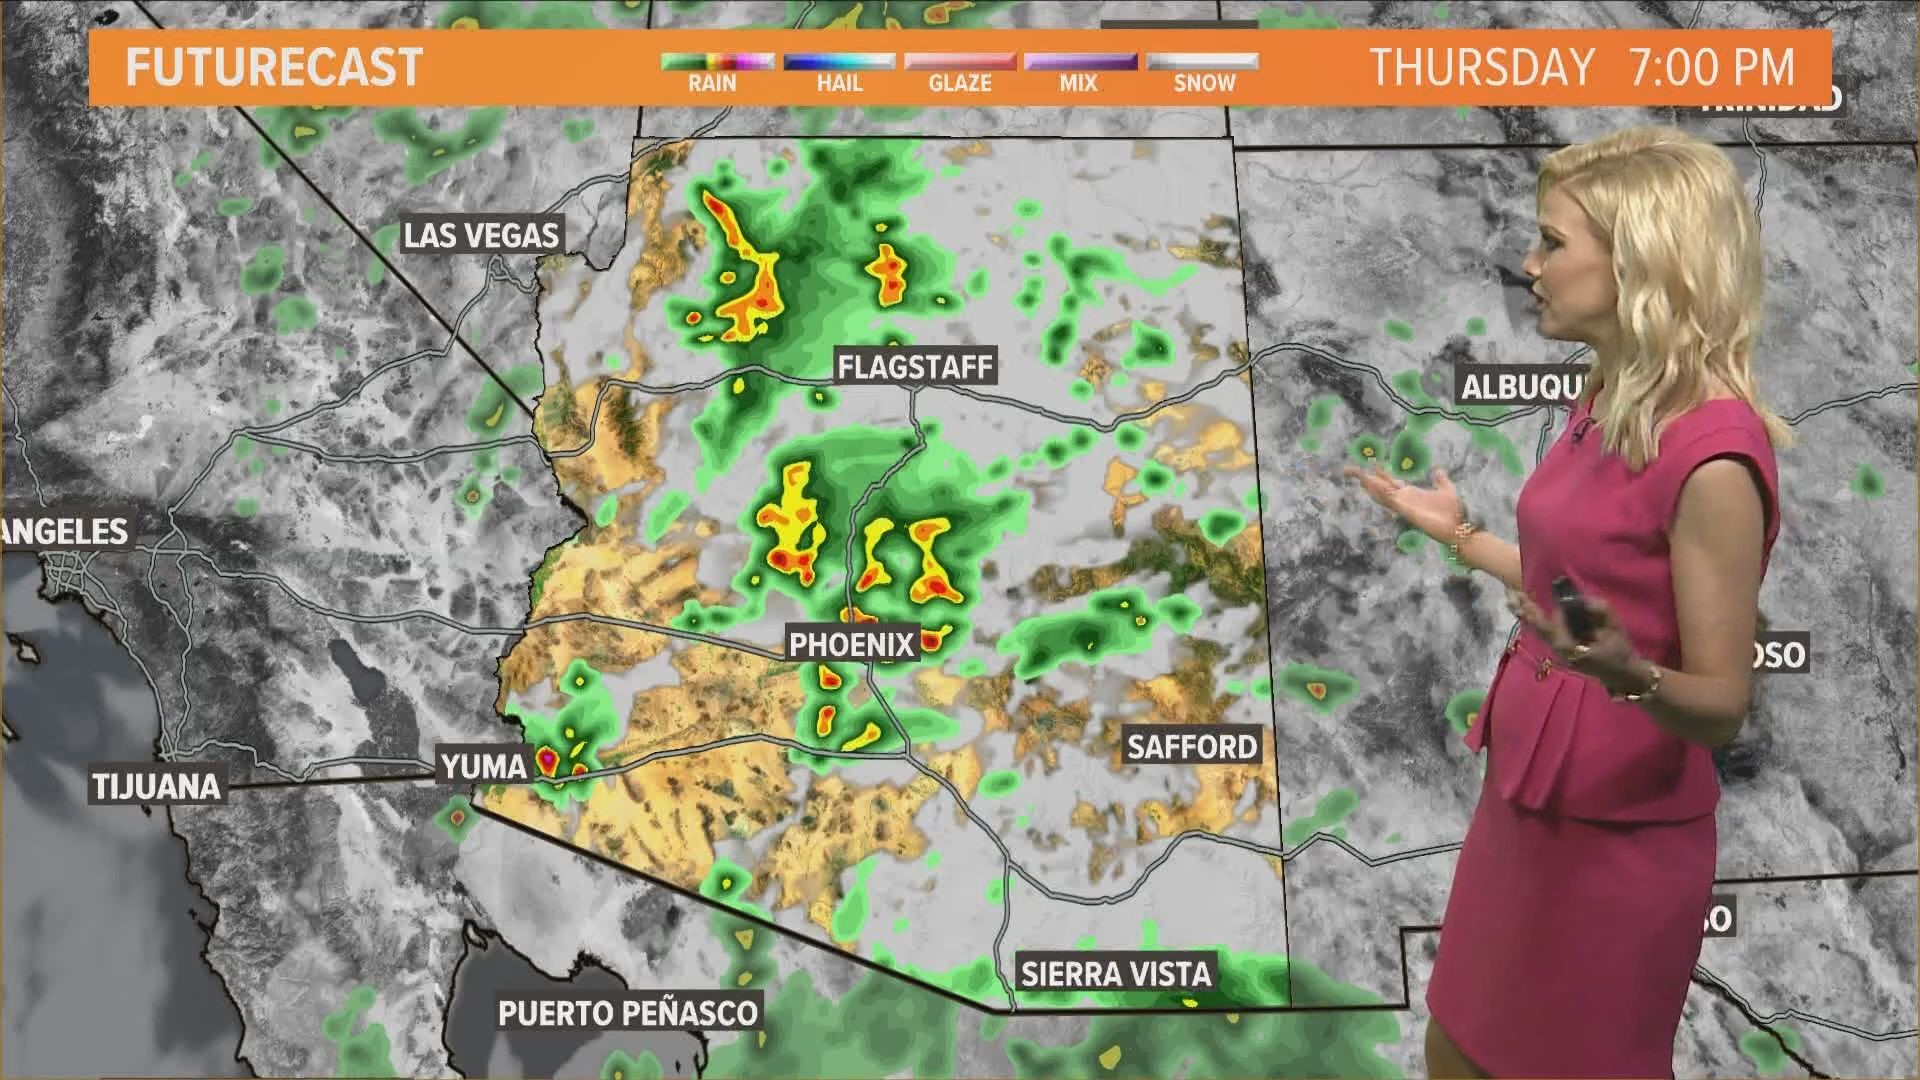 Here's what you can expect for the Thursday forecast in the Valley. Krystle Henderson has the details for Aug. 18, 2022.